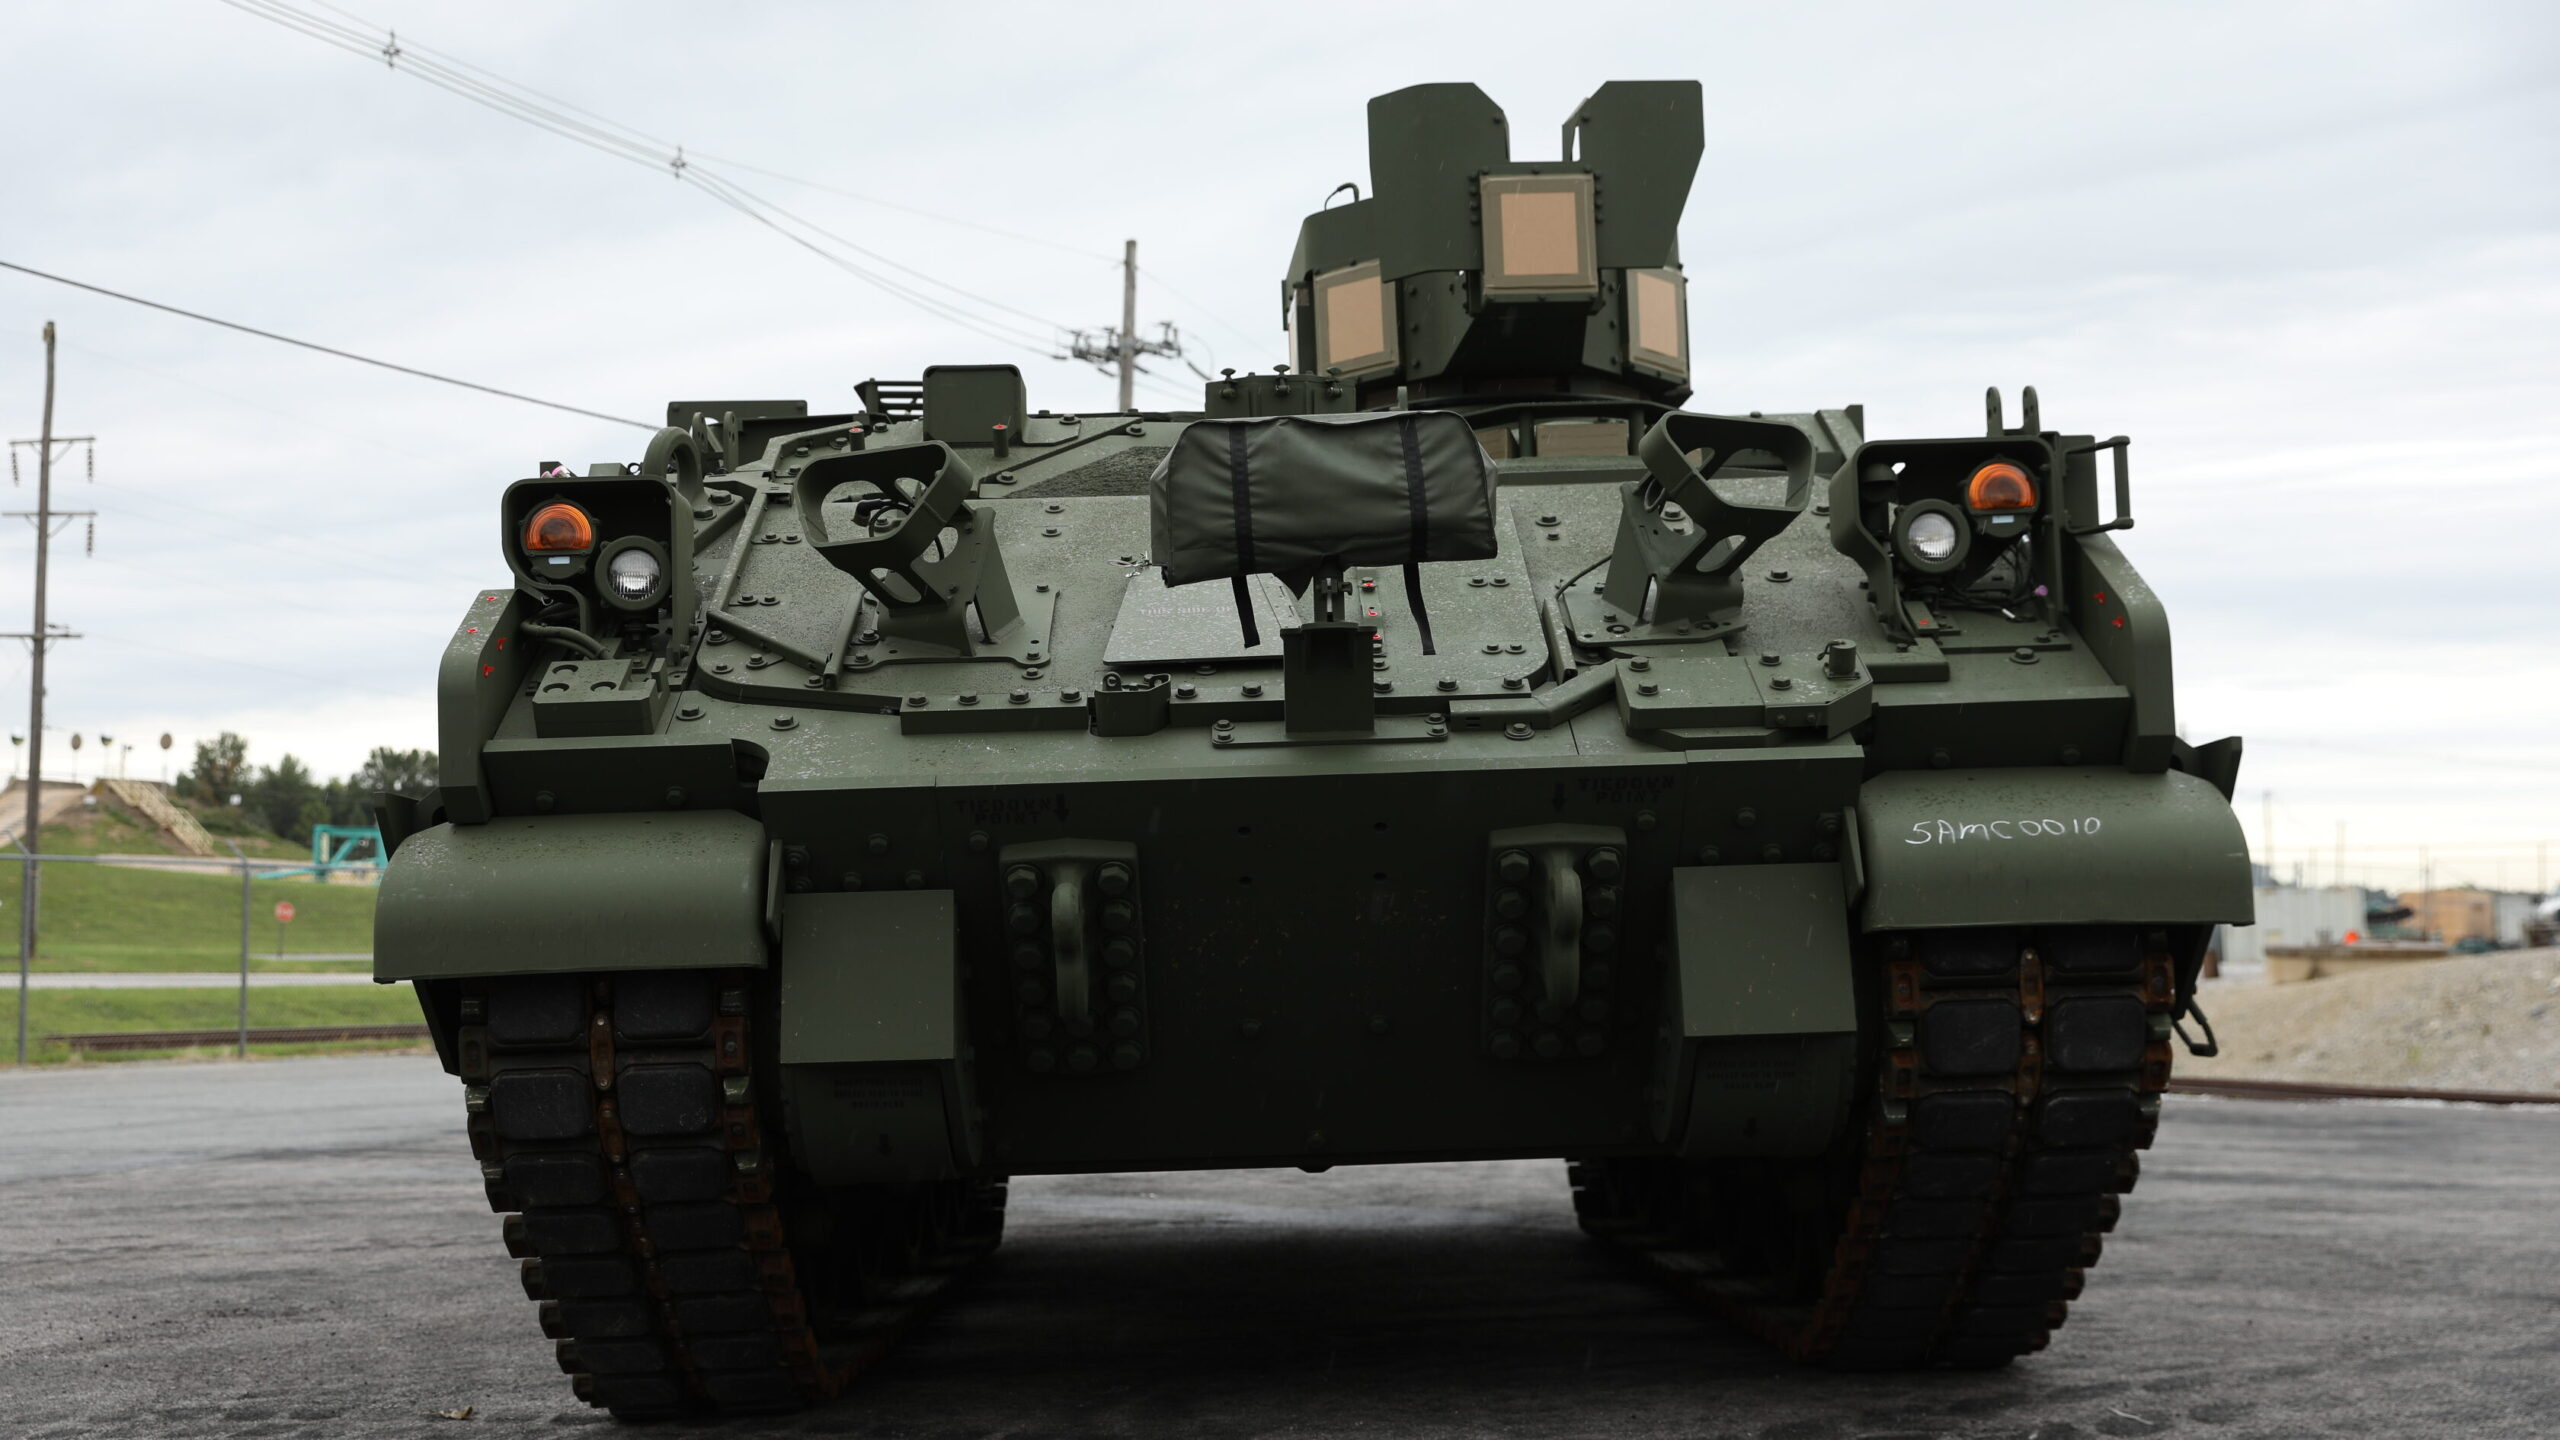 BAE Delivers 1st Production AMPV To Army Despite Cuts & Delays